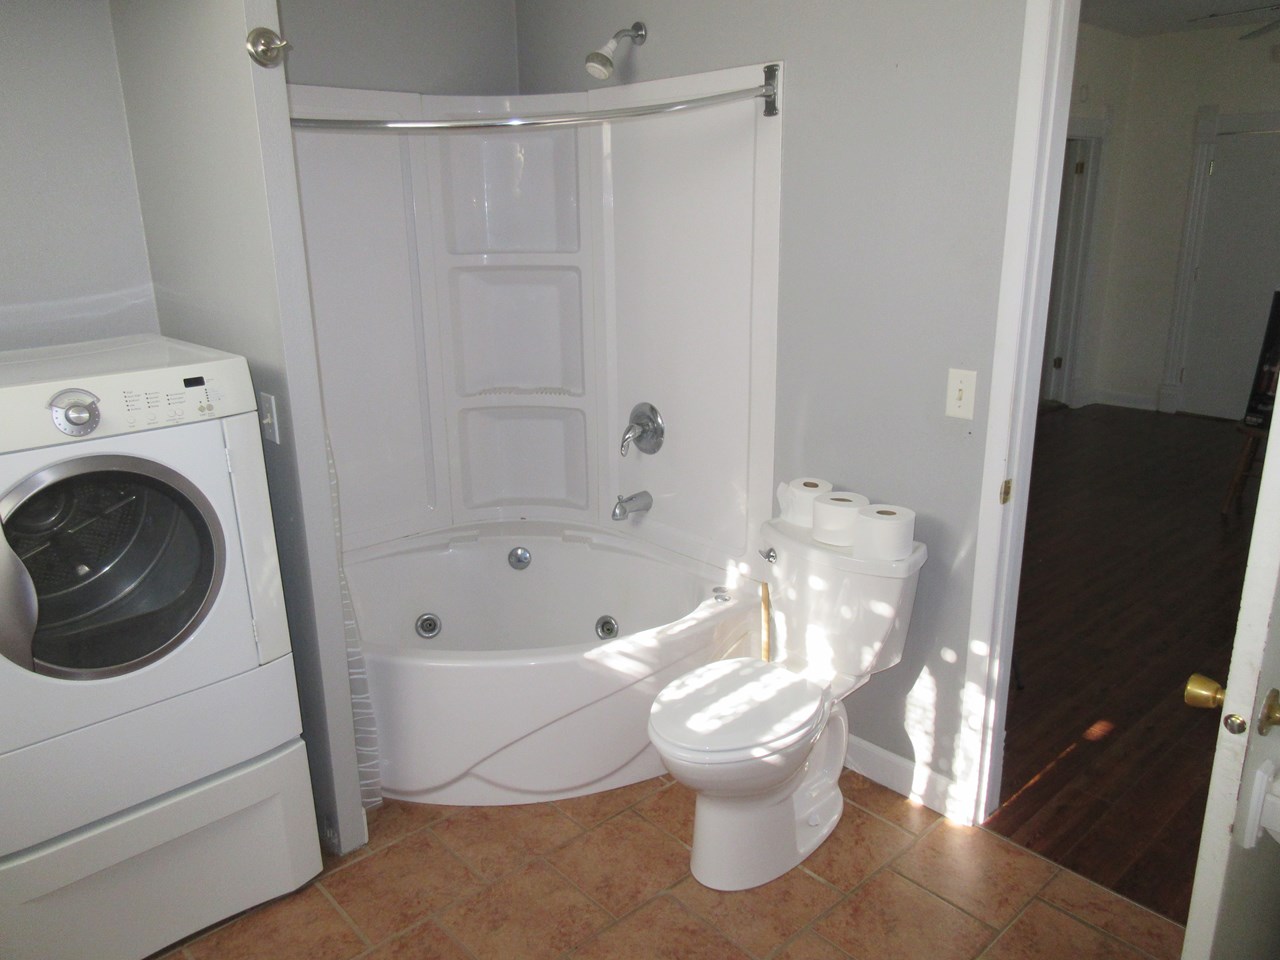 main floor bathroom washer and dryer are not included.  the shower works, but jets in tub do not.